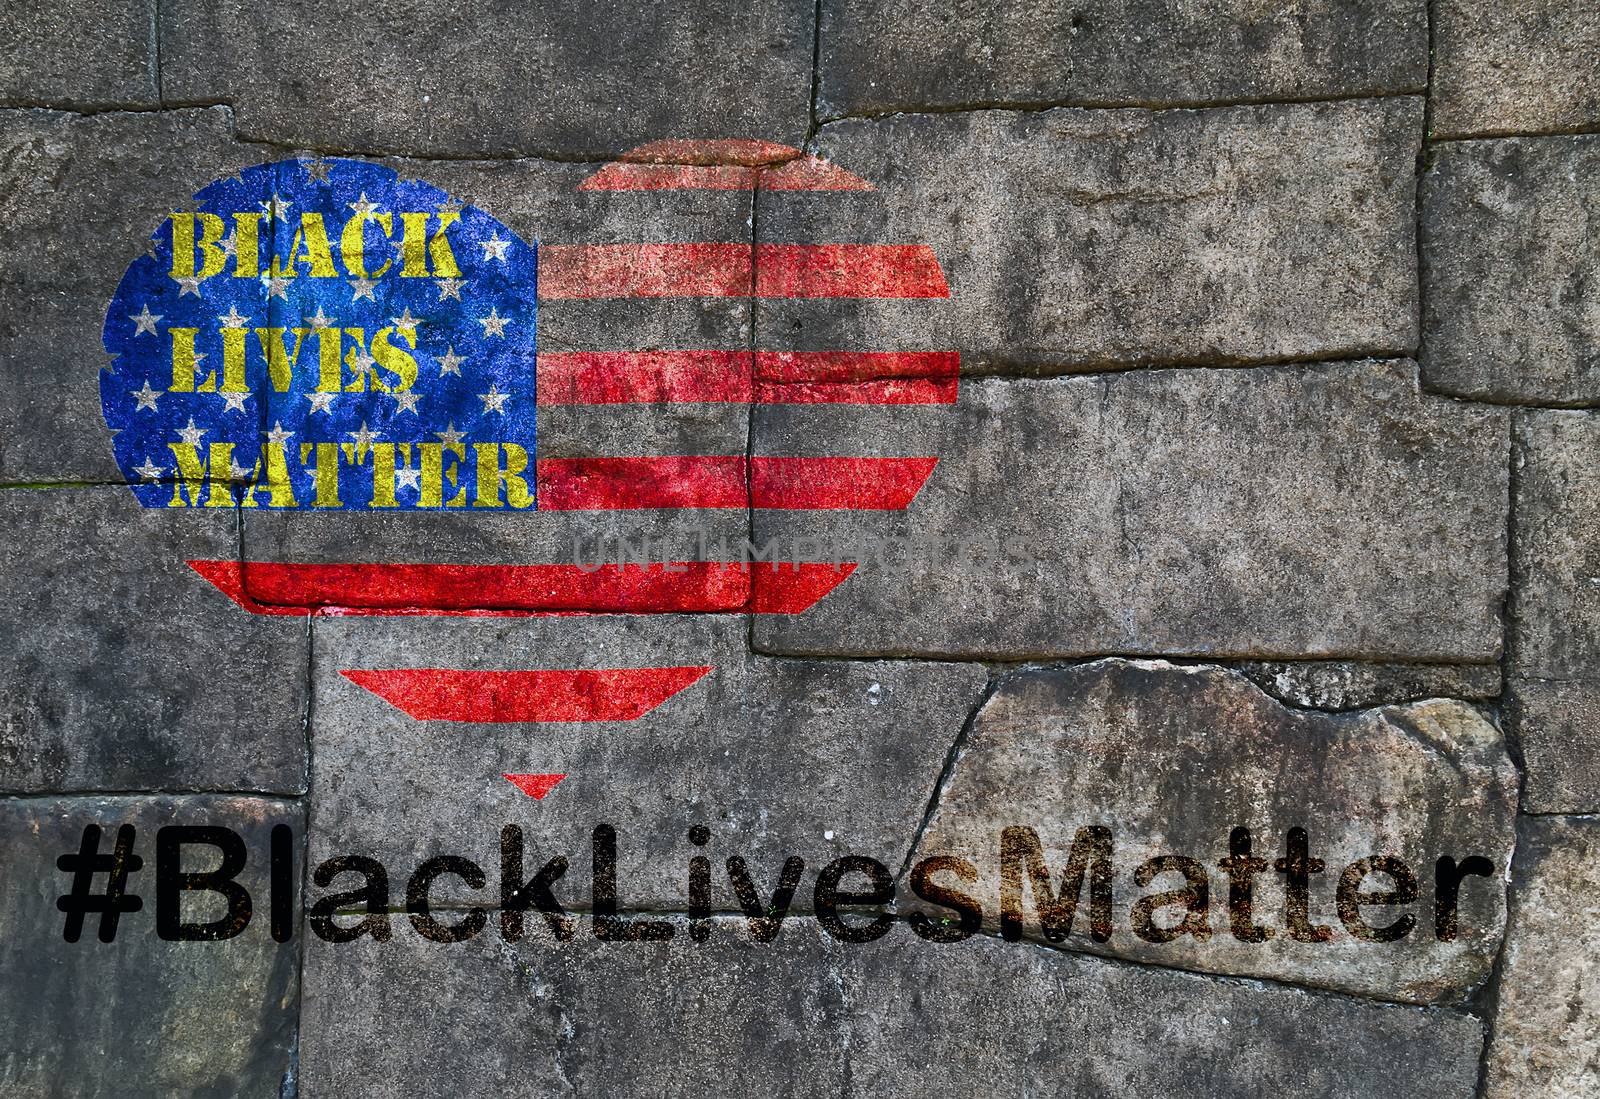 Black Lives Matter hashtag African-American people Protest against Black racism stencil heart United States of America United States Flag of the USA Old brick wall background texture stone